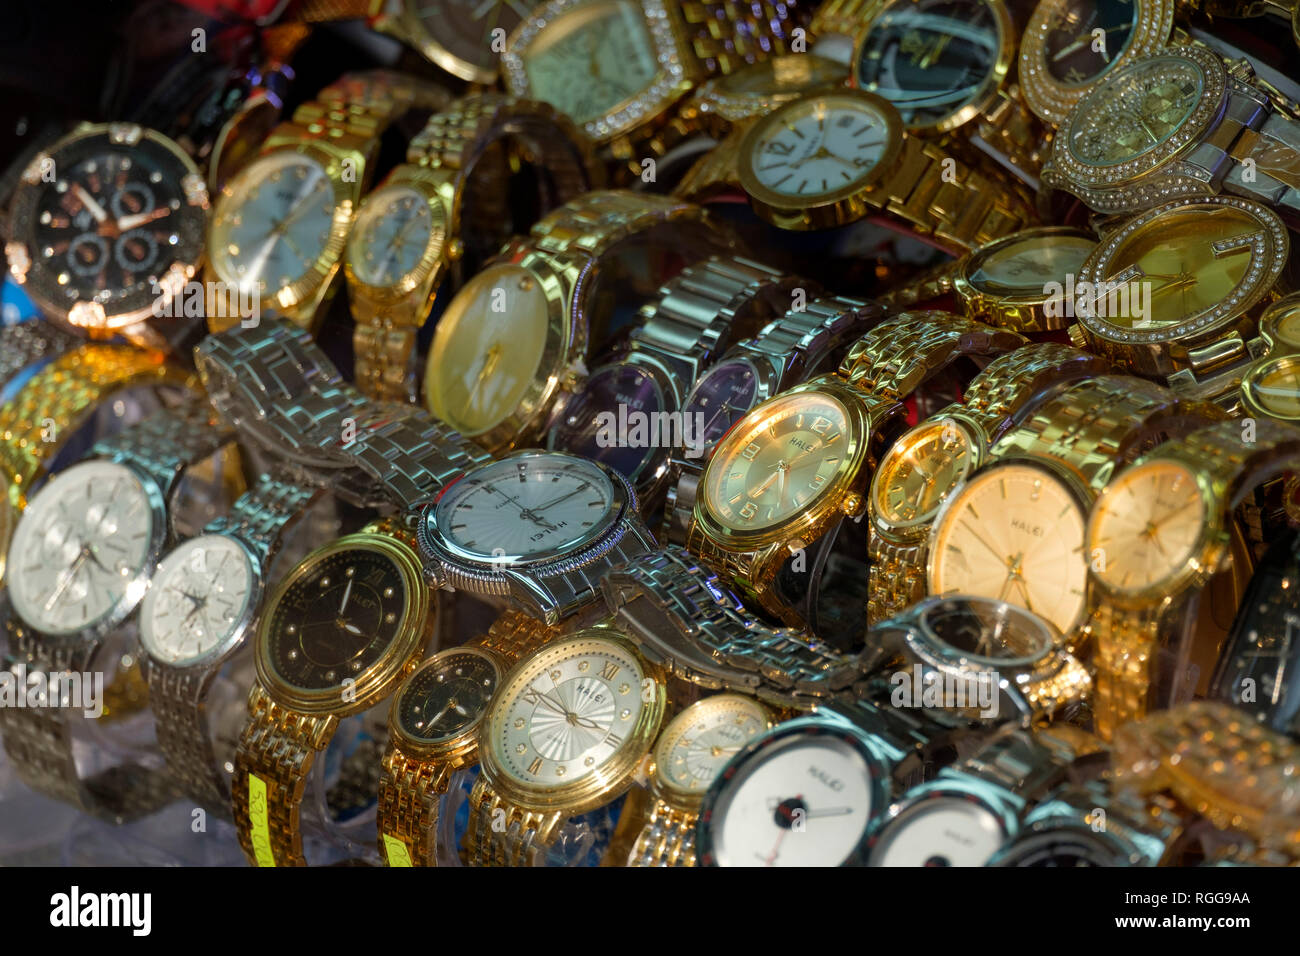 Counterfeit wrist watches for sale at a flea market Stock Photo